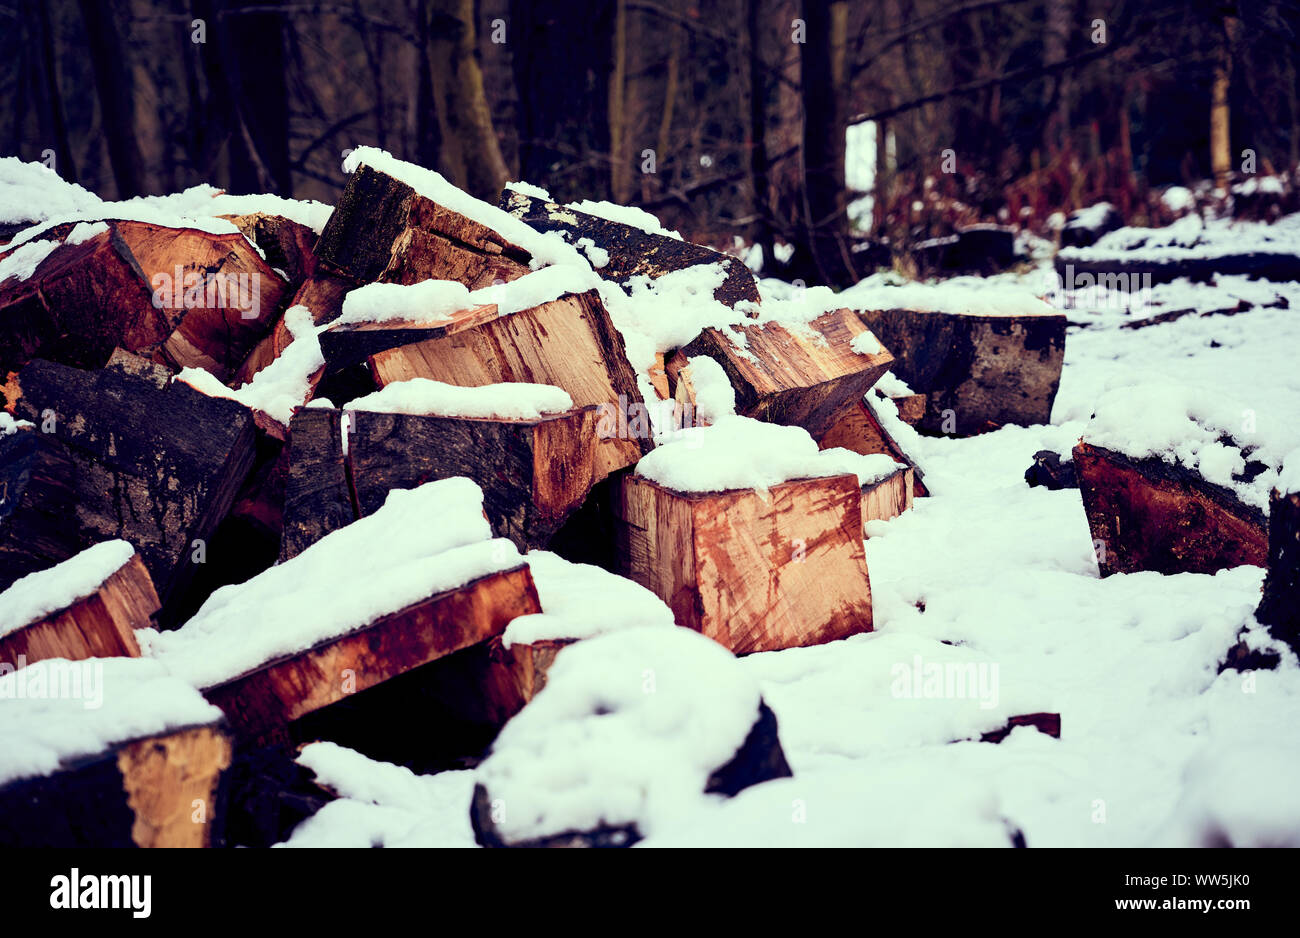 A woodland scene of chopped logs under a covering of snow at sunset. Stock Photo